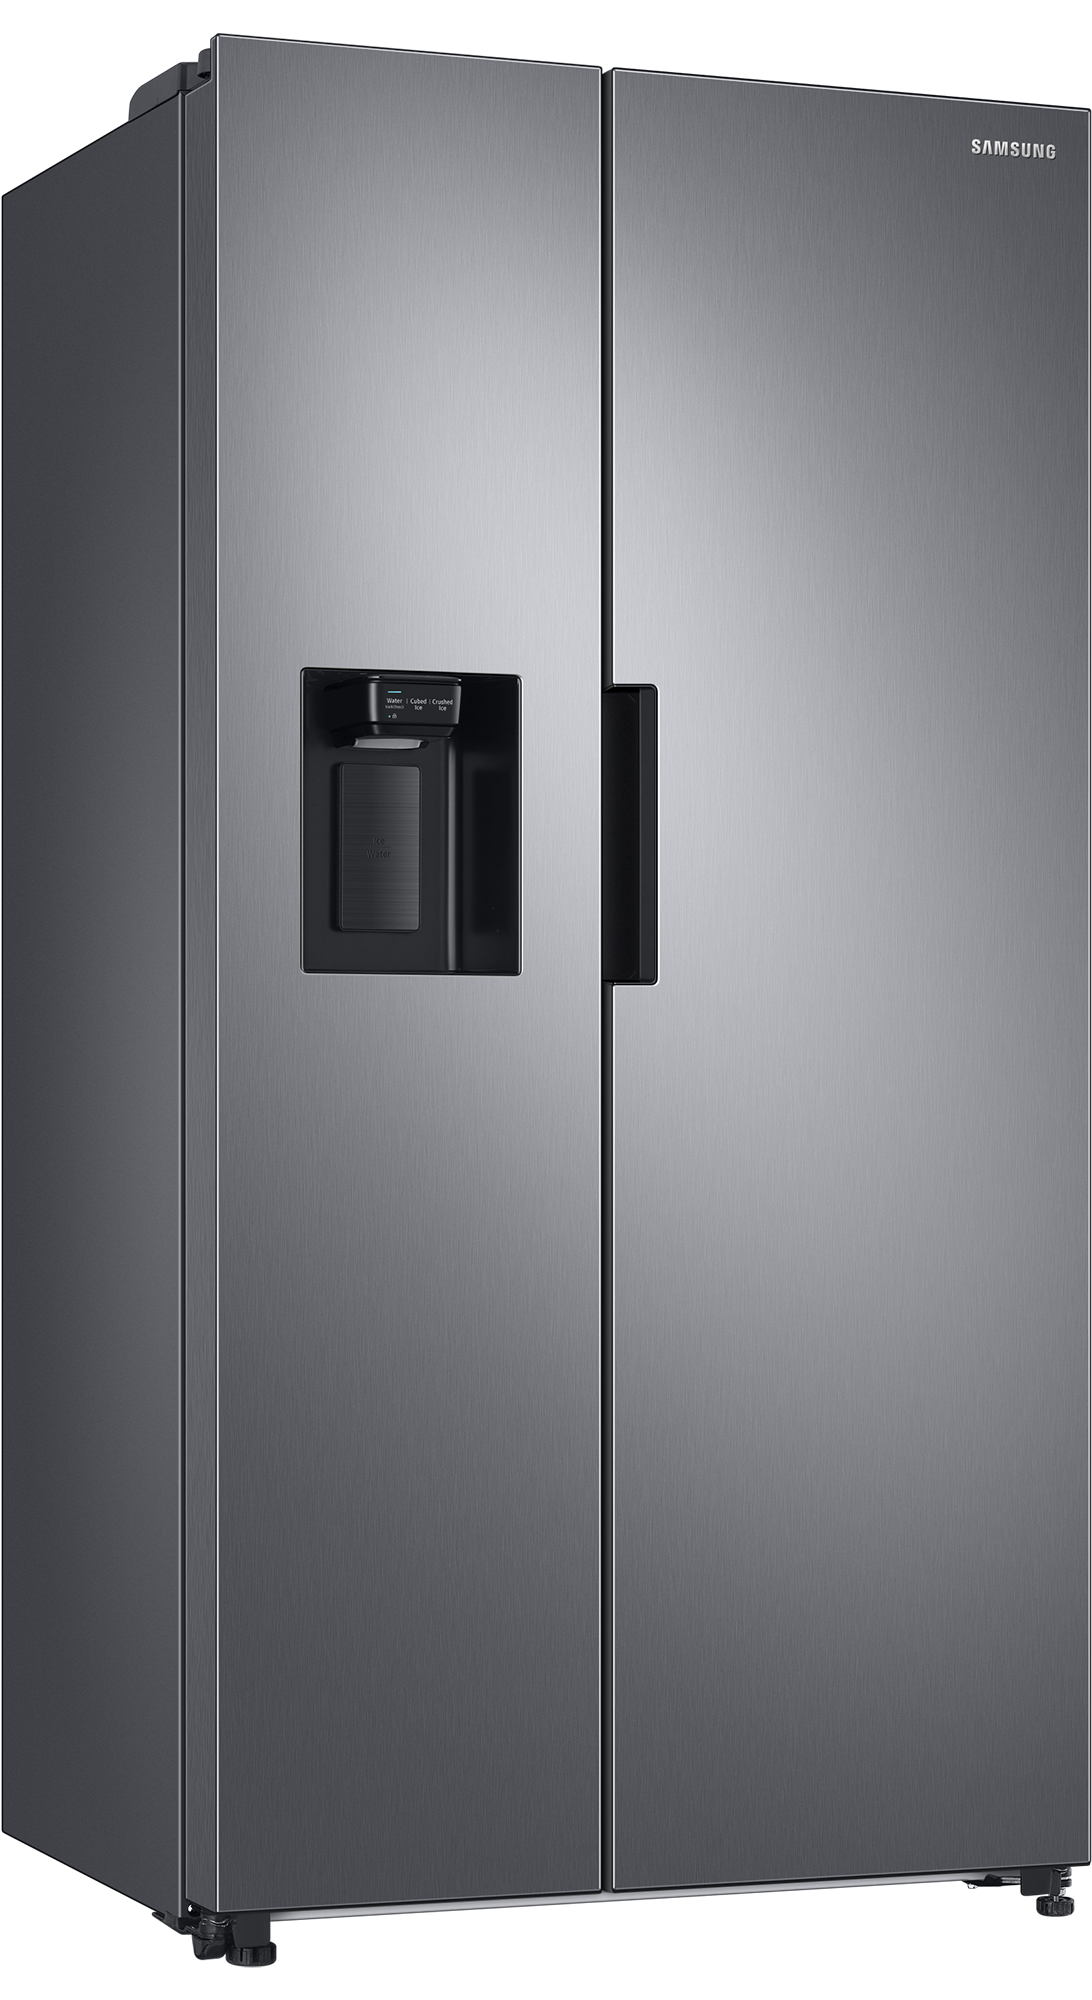 RS8000 7 Series American Style Fridge Freezer with SpaceMax™ Technology ...